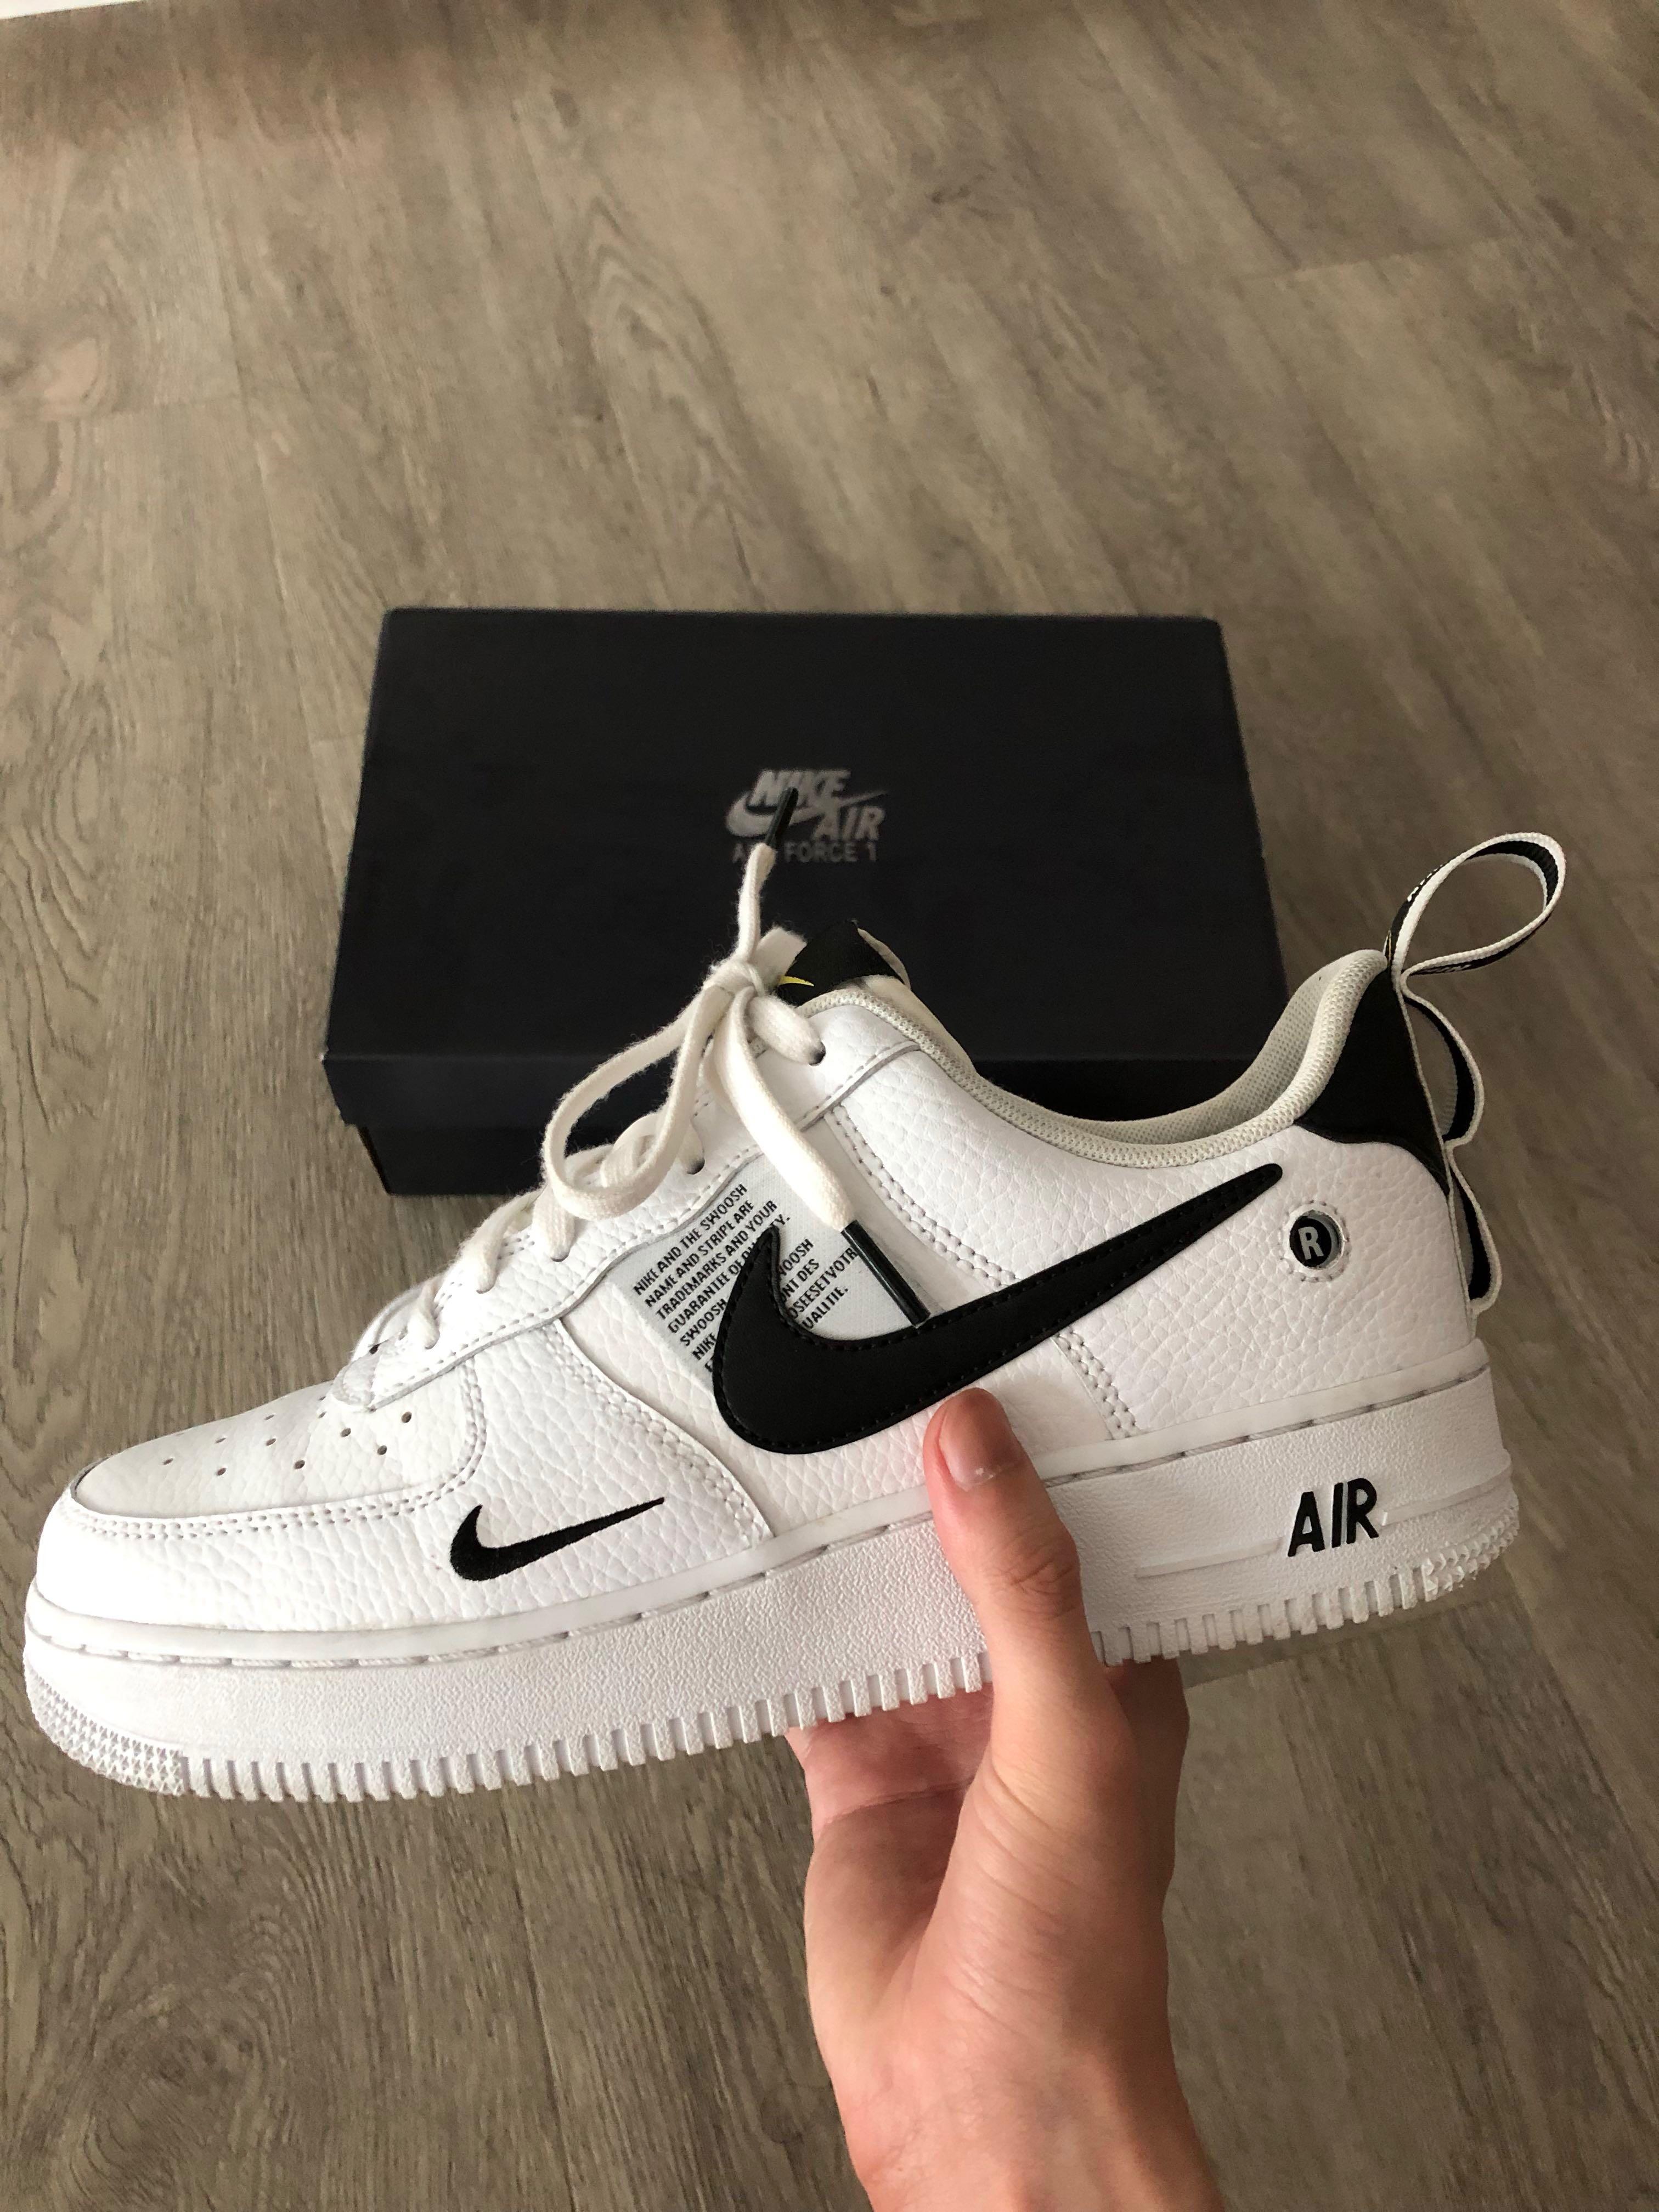 nike air force 1 utility size 9